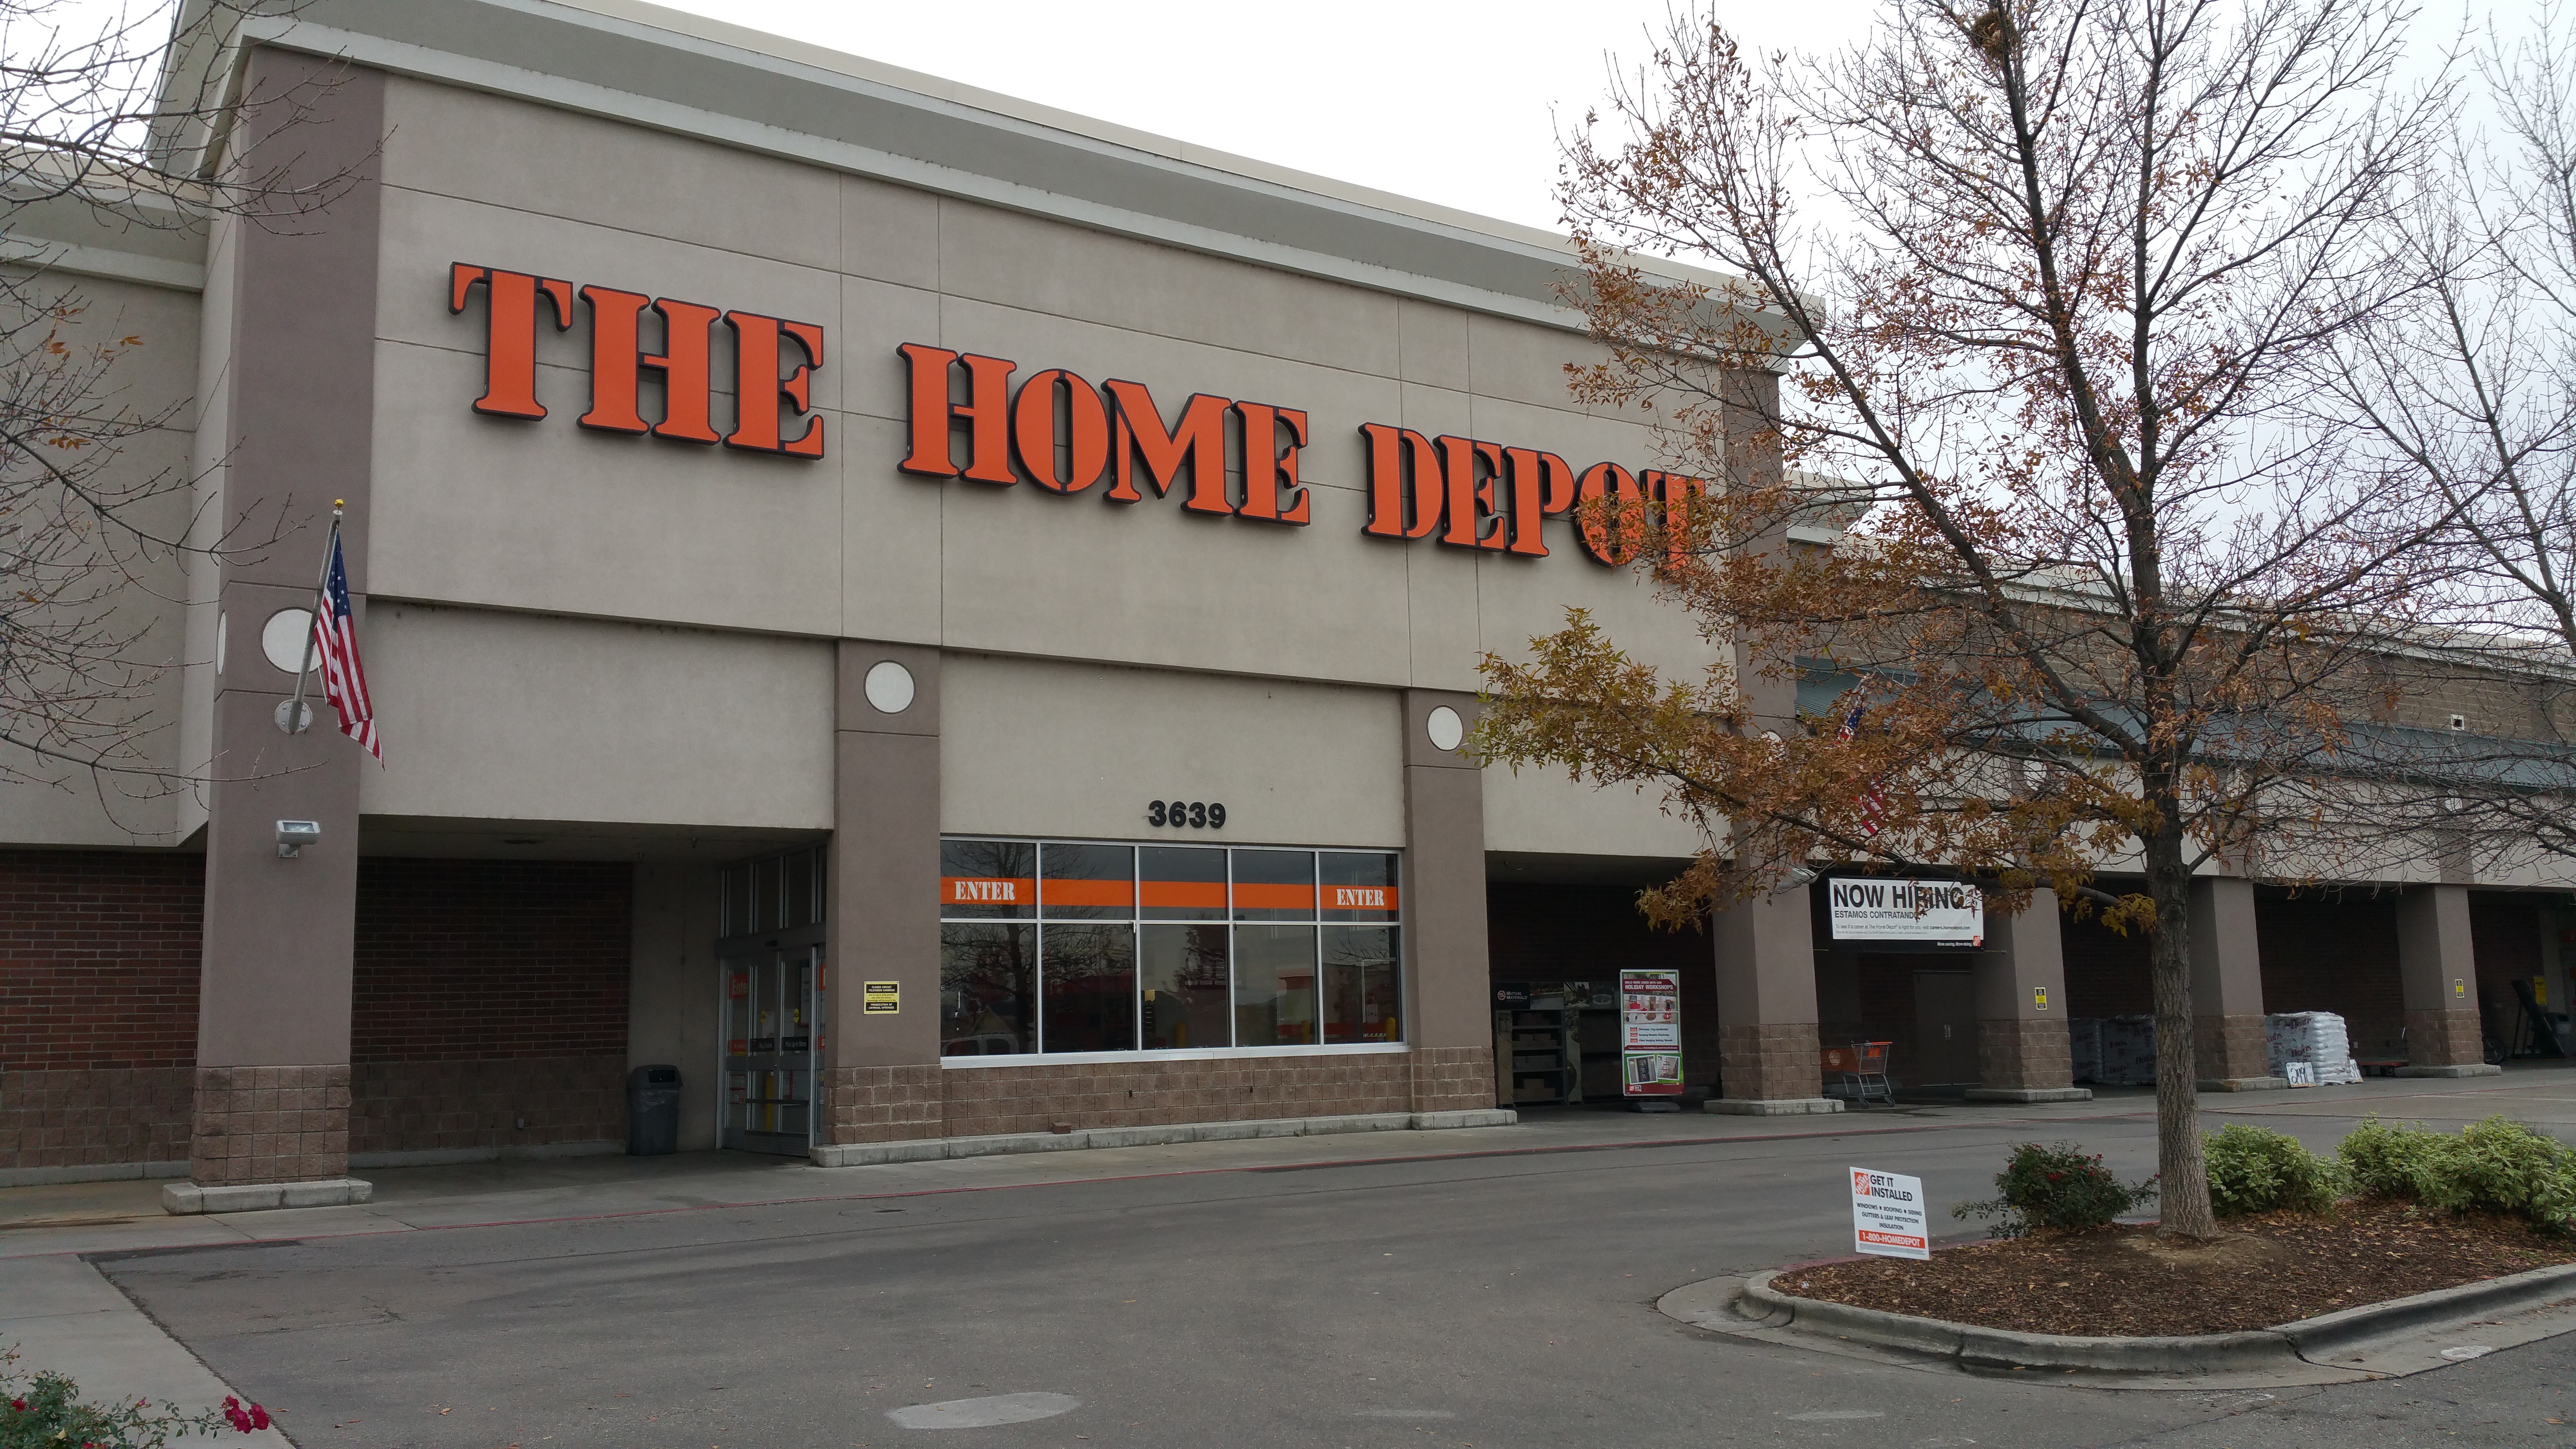 The Home Depot 3639 S Federal Way, Boise, ID 83705 